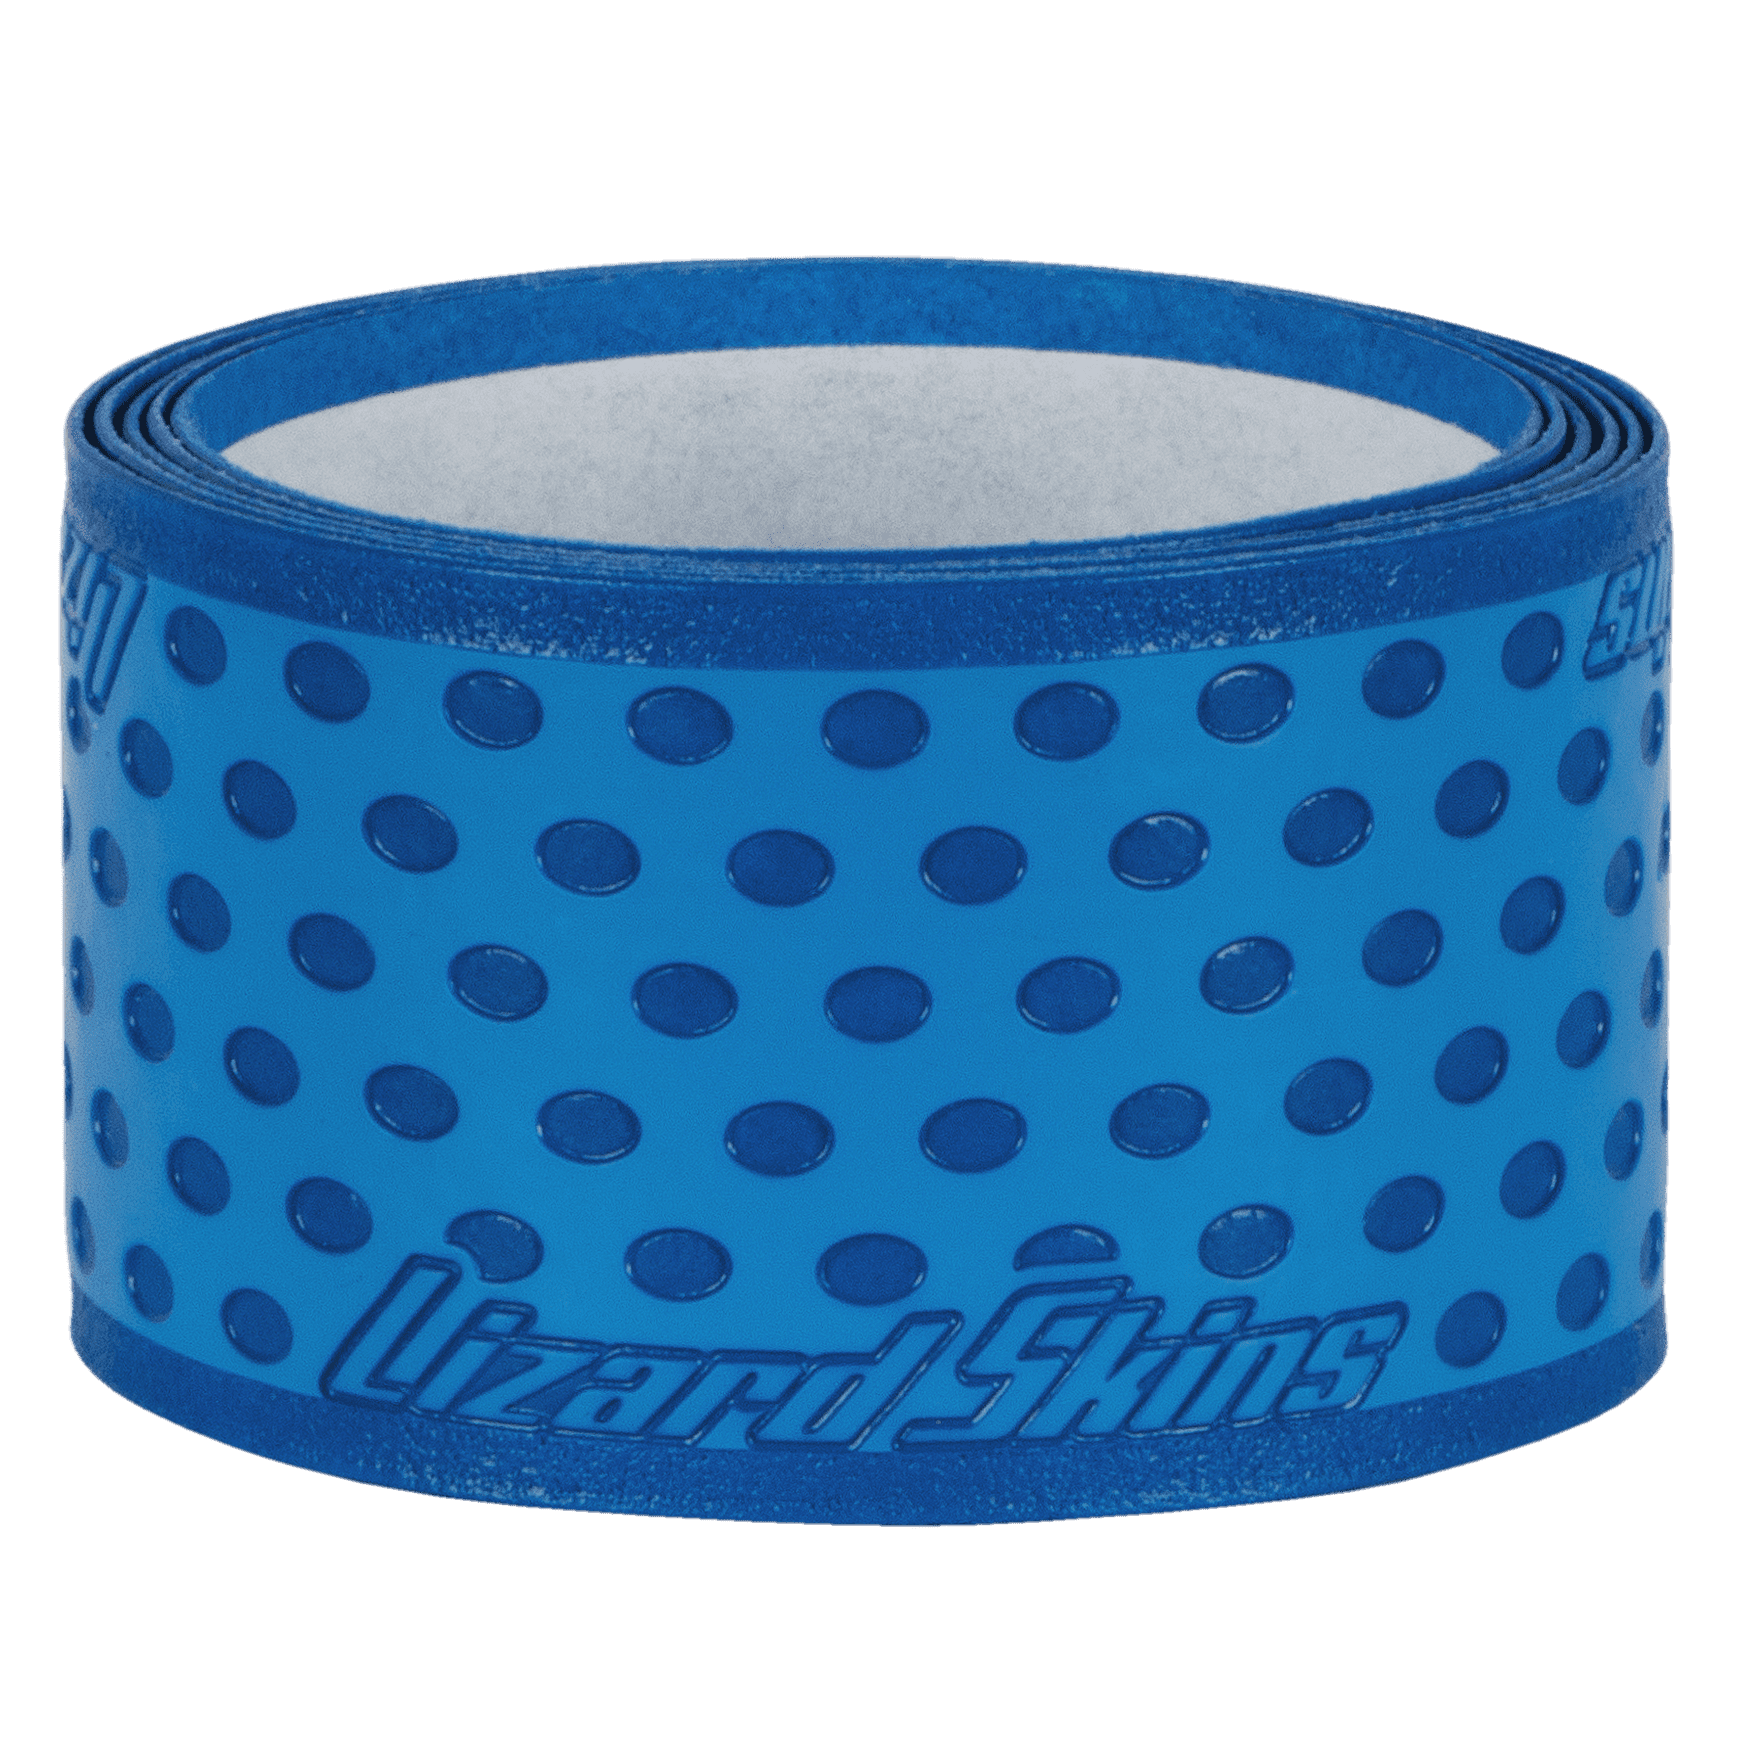 Unique Sports Sting Off Shock Absorbing Bat Grip Synthetic Tape 12-Pack 